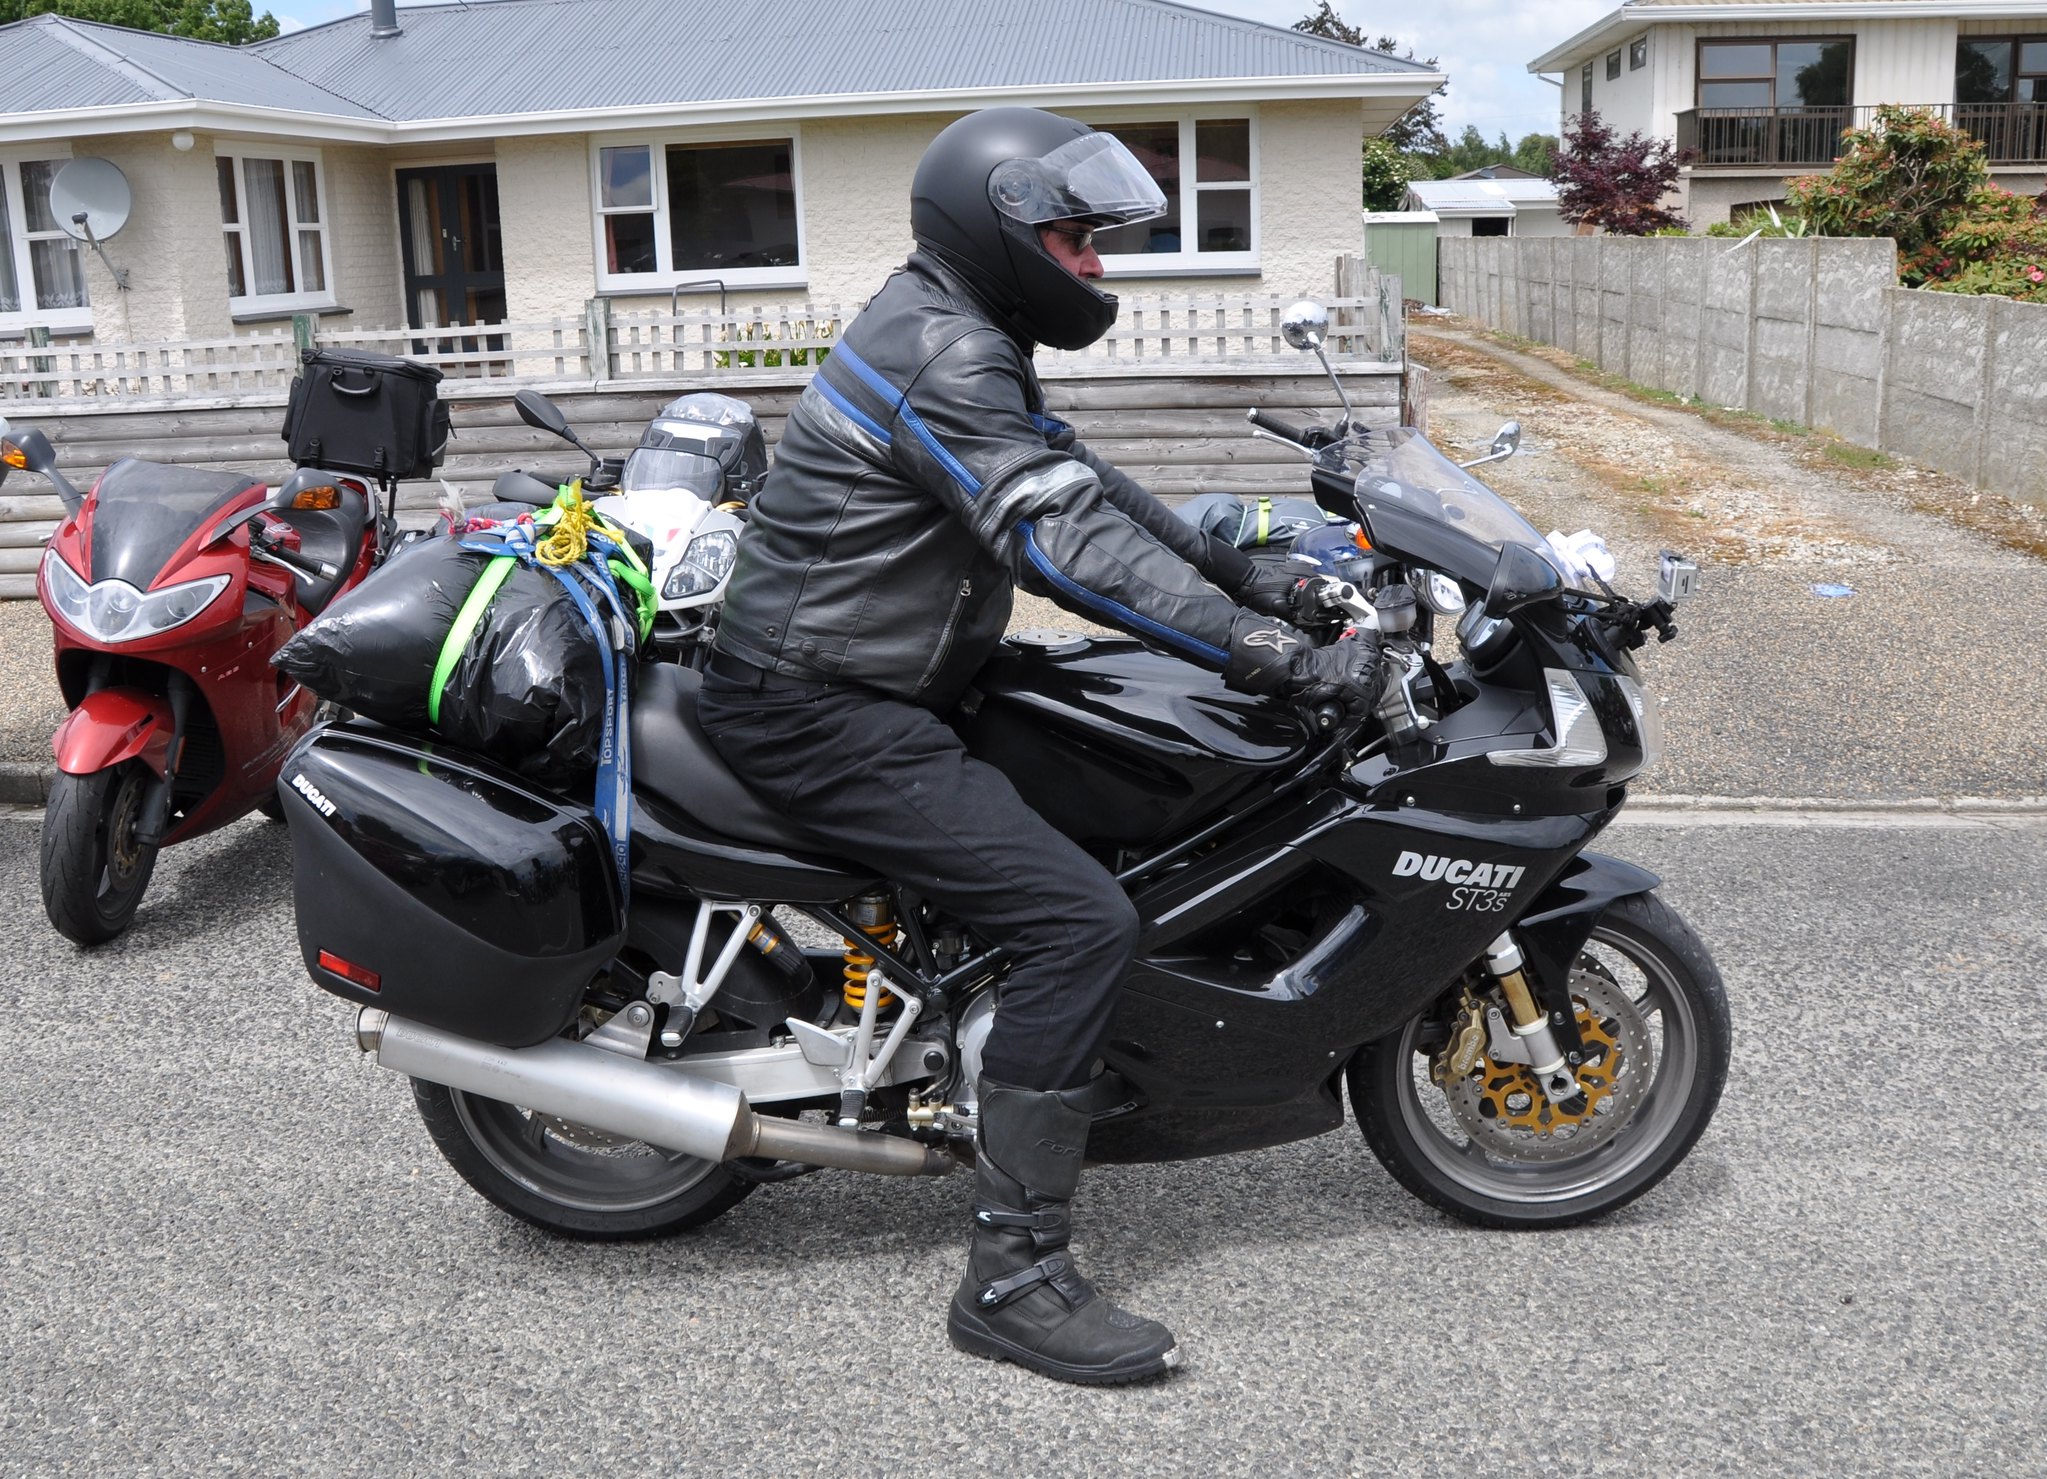 Motorcycle Riding Position - Street Riding - Touring